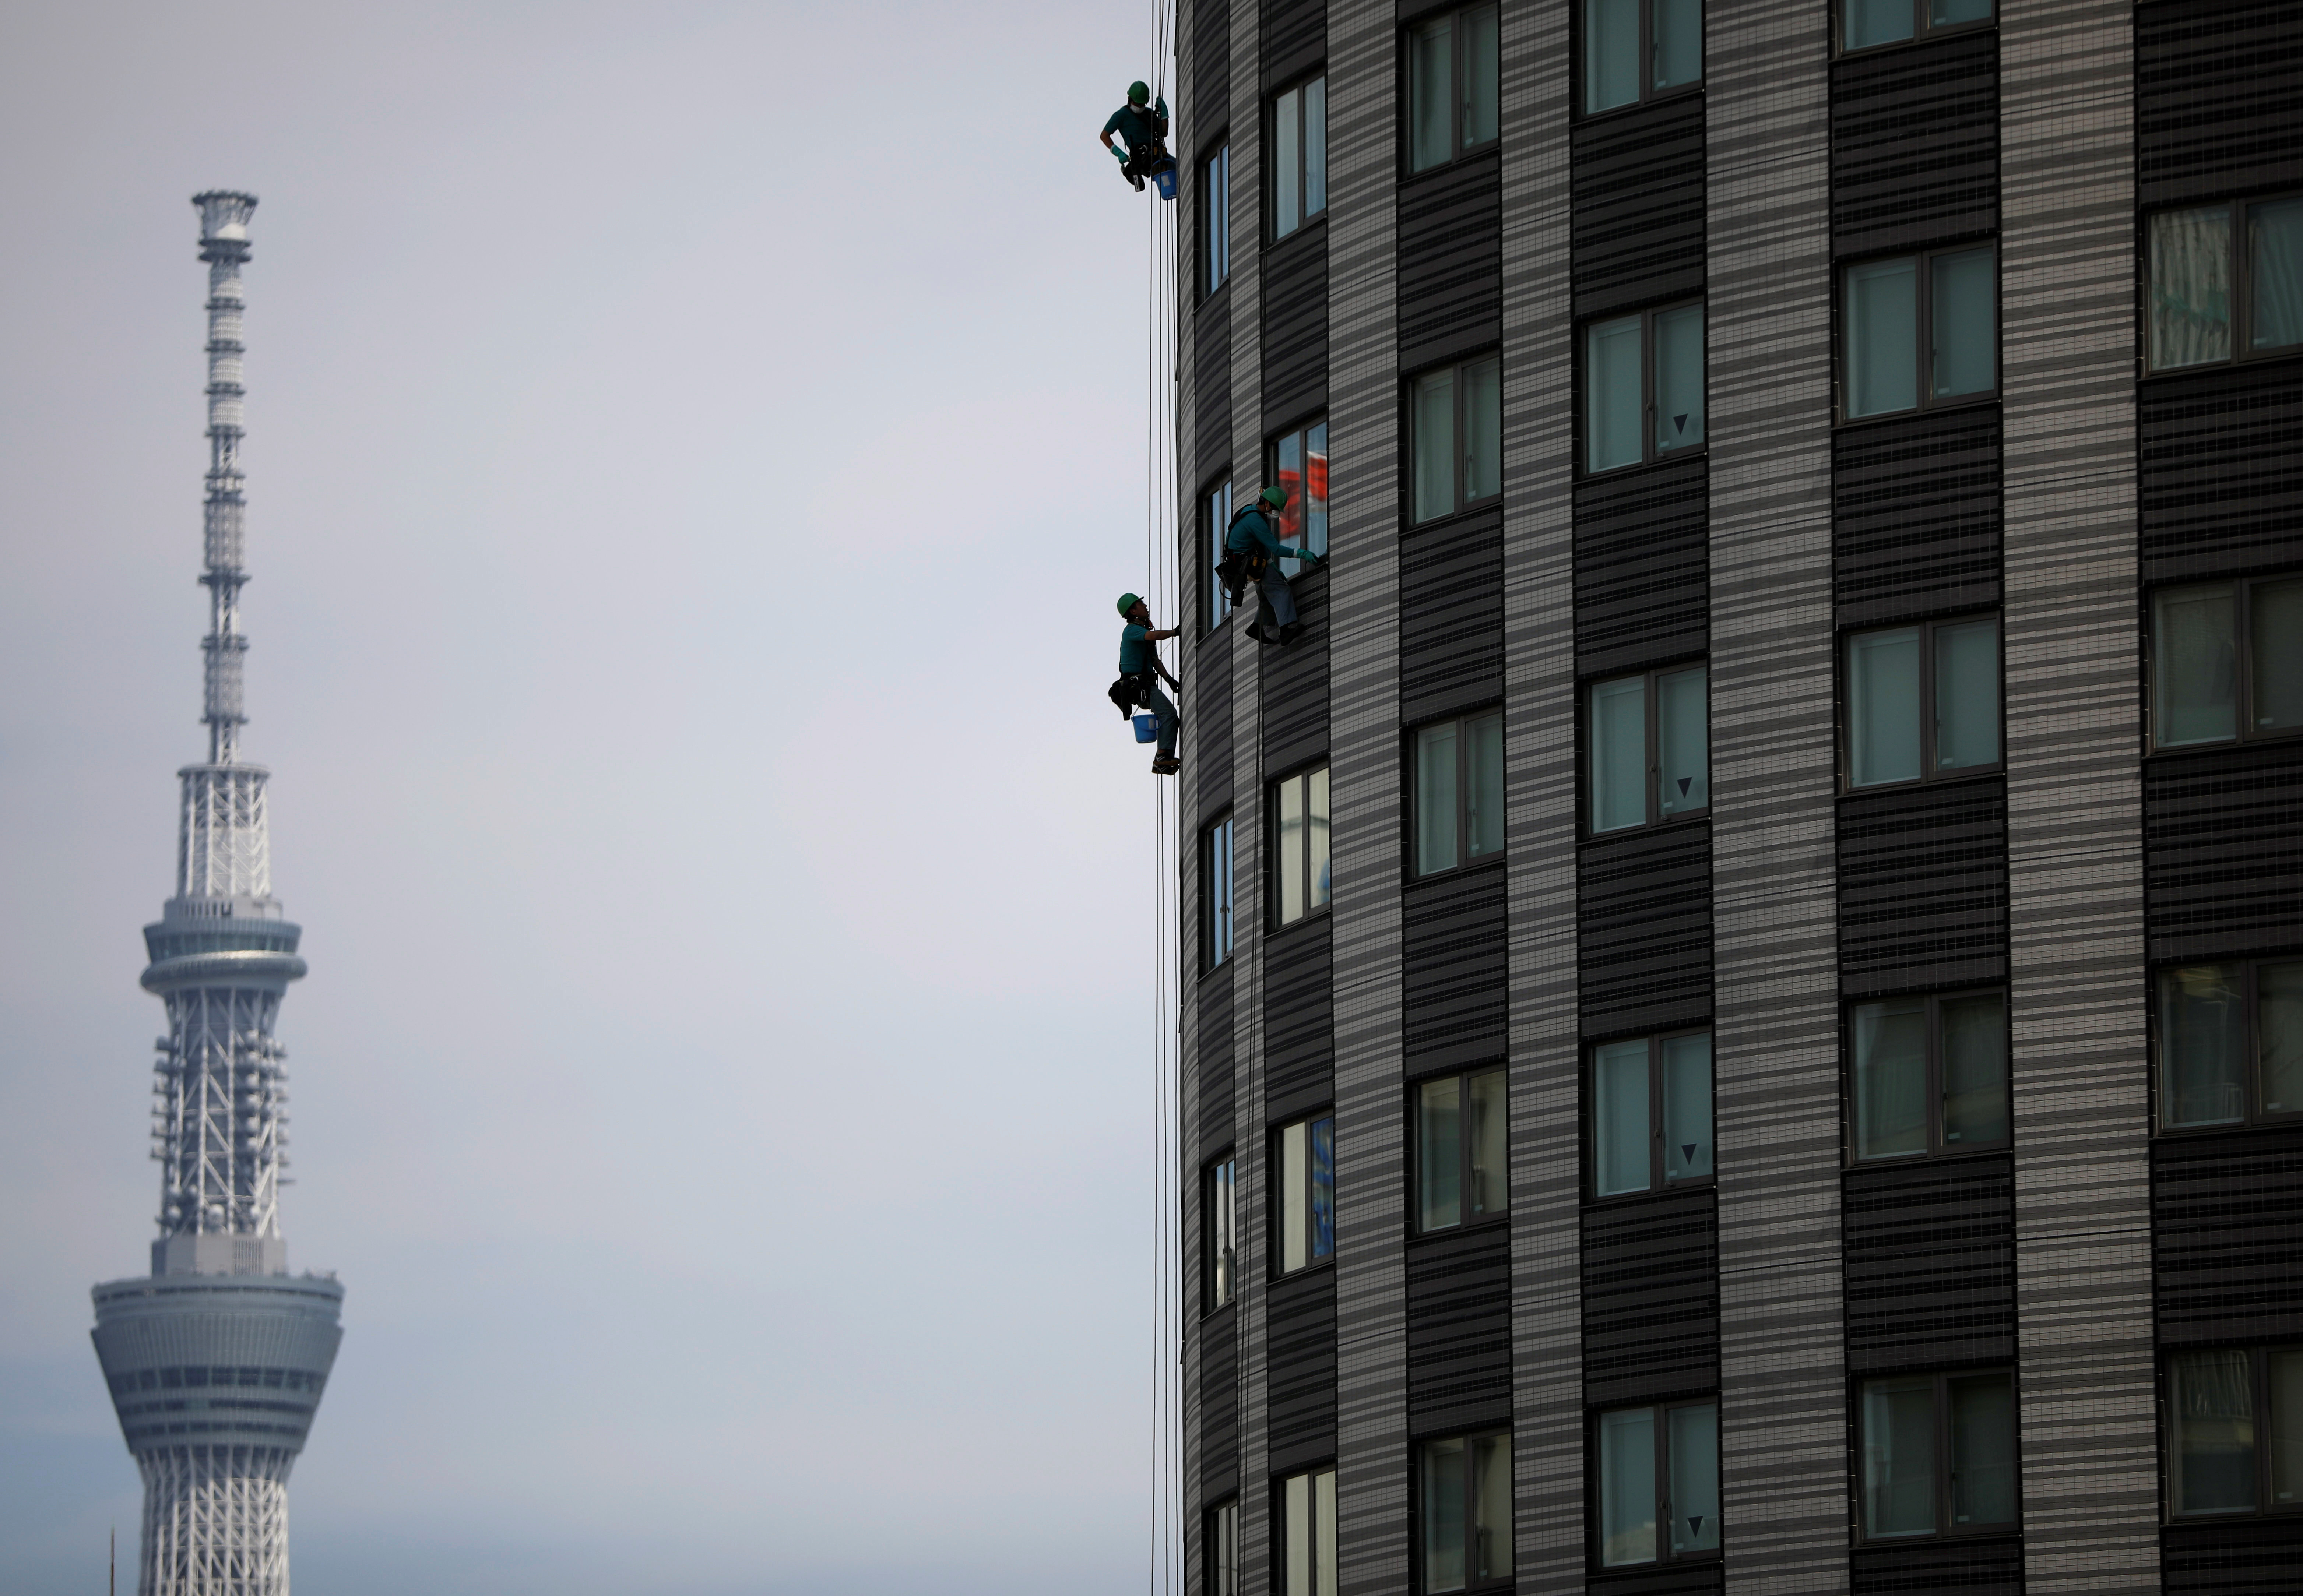 Workers clean the windows of a hotel with Tokyo Skytree, the world's tallest broadcasting tower, in the background during the spread of the coronavirus disease (COVID-19) in Tokyo